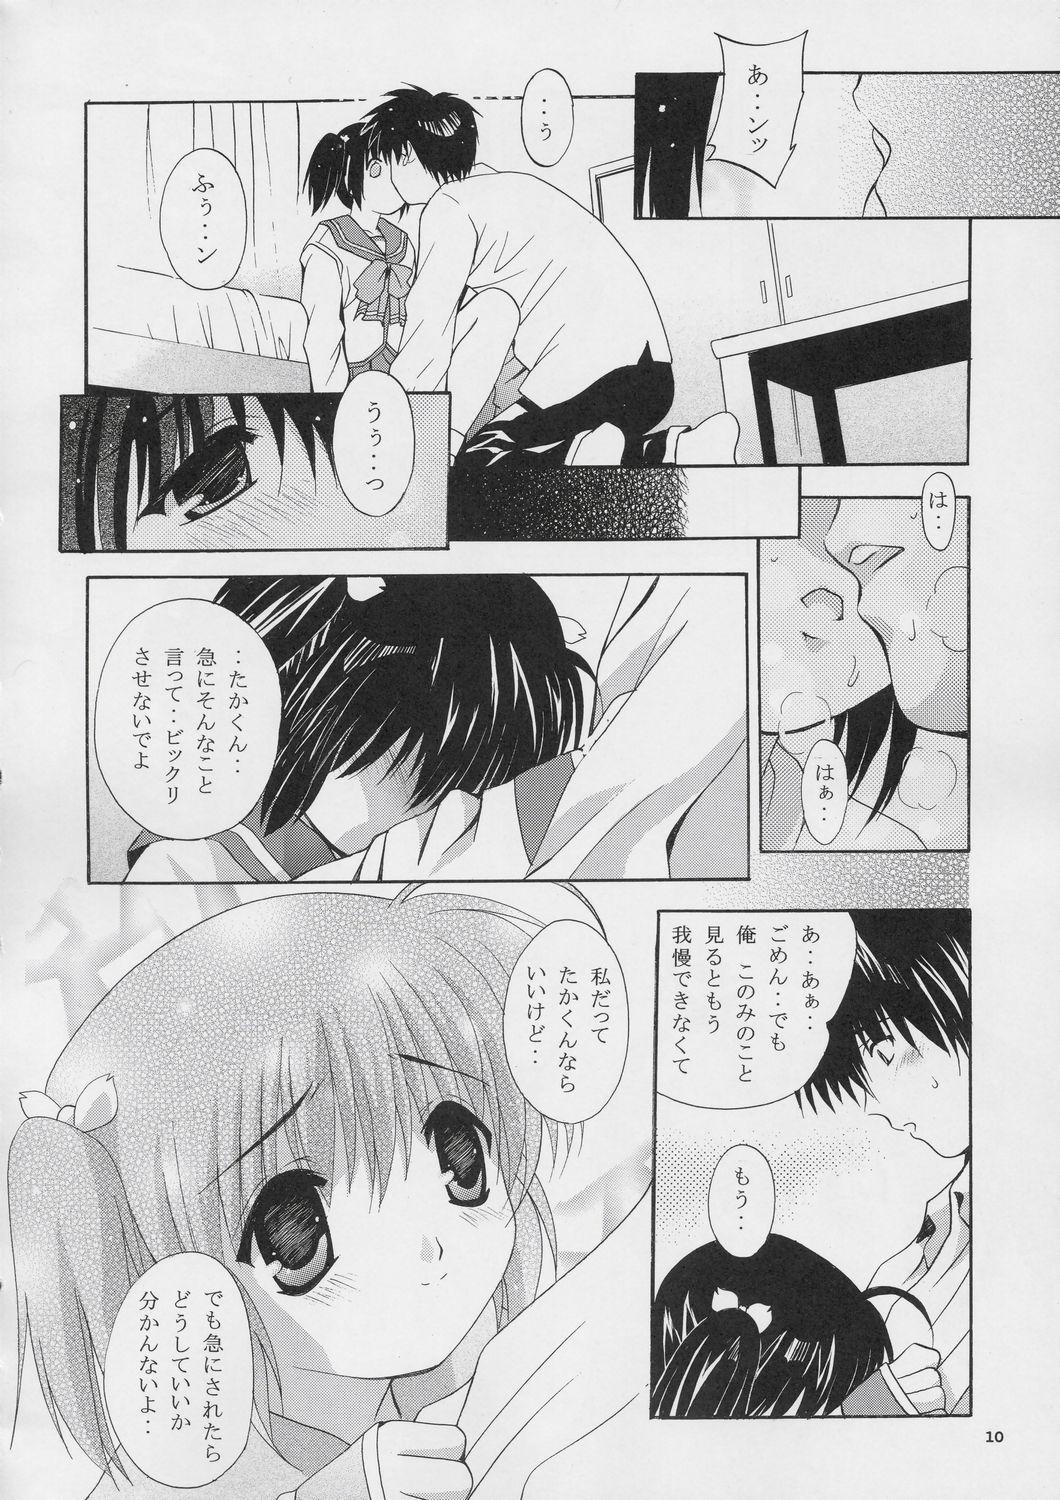 Interacial MOUSOU THEATER 16 - Toheart2 Punk - Page 9